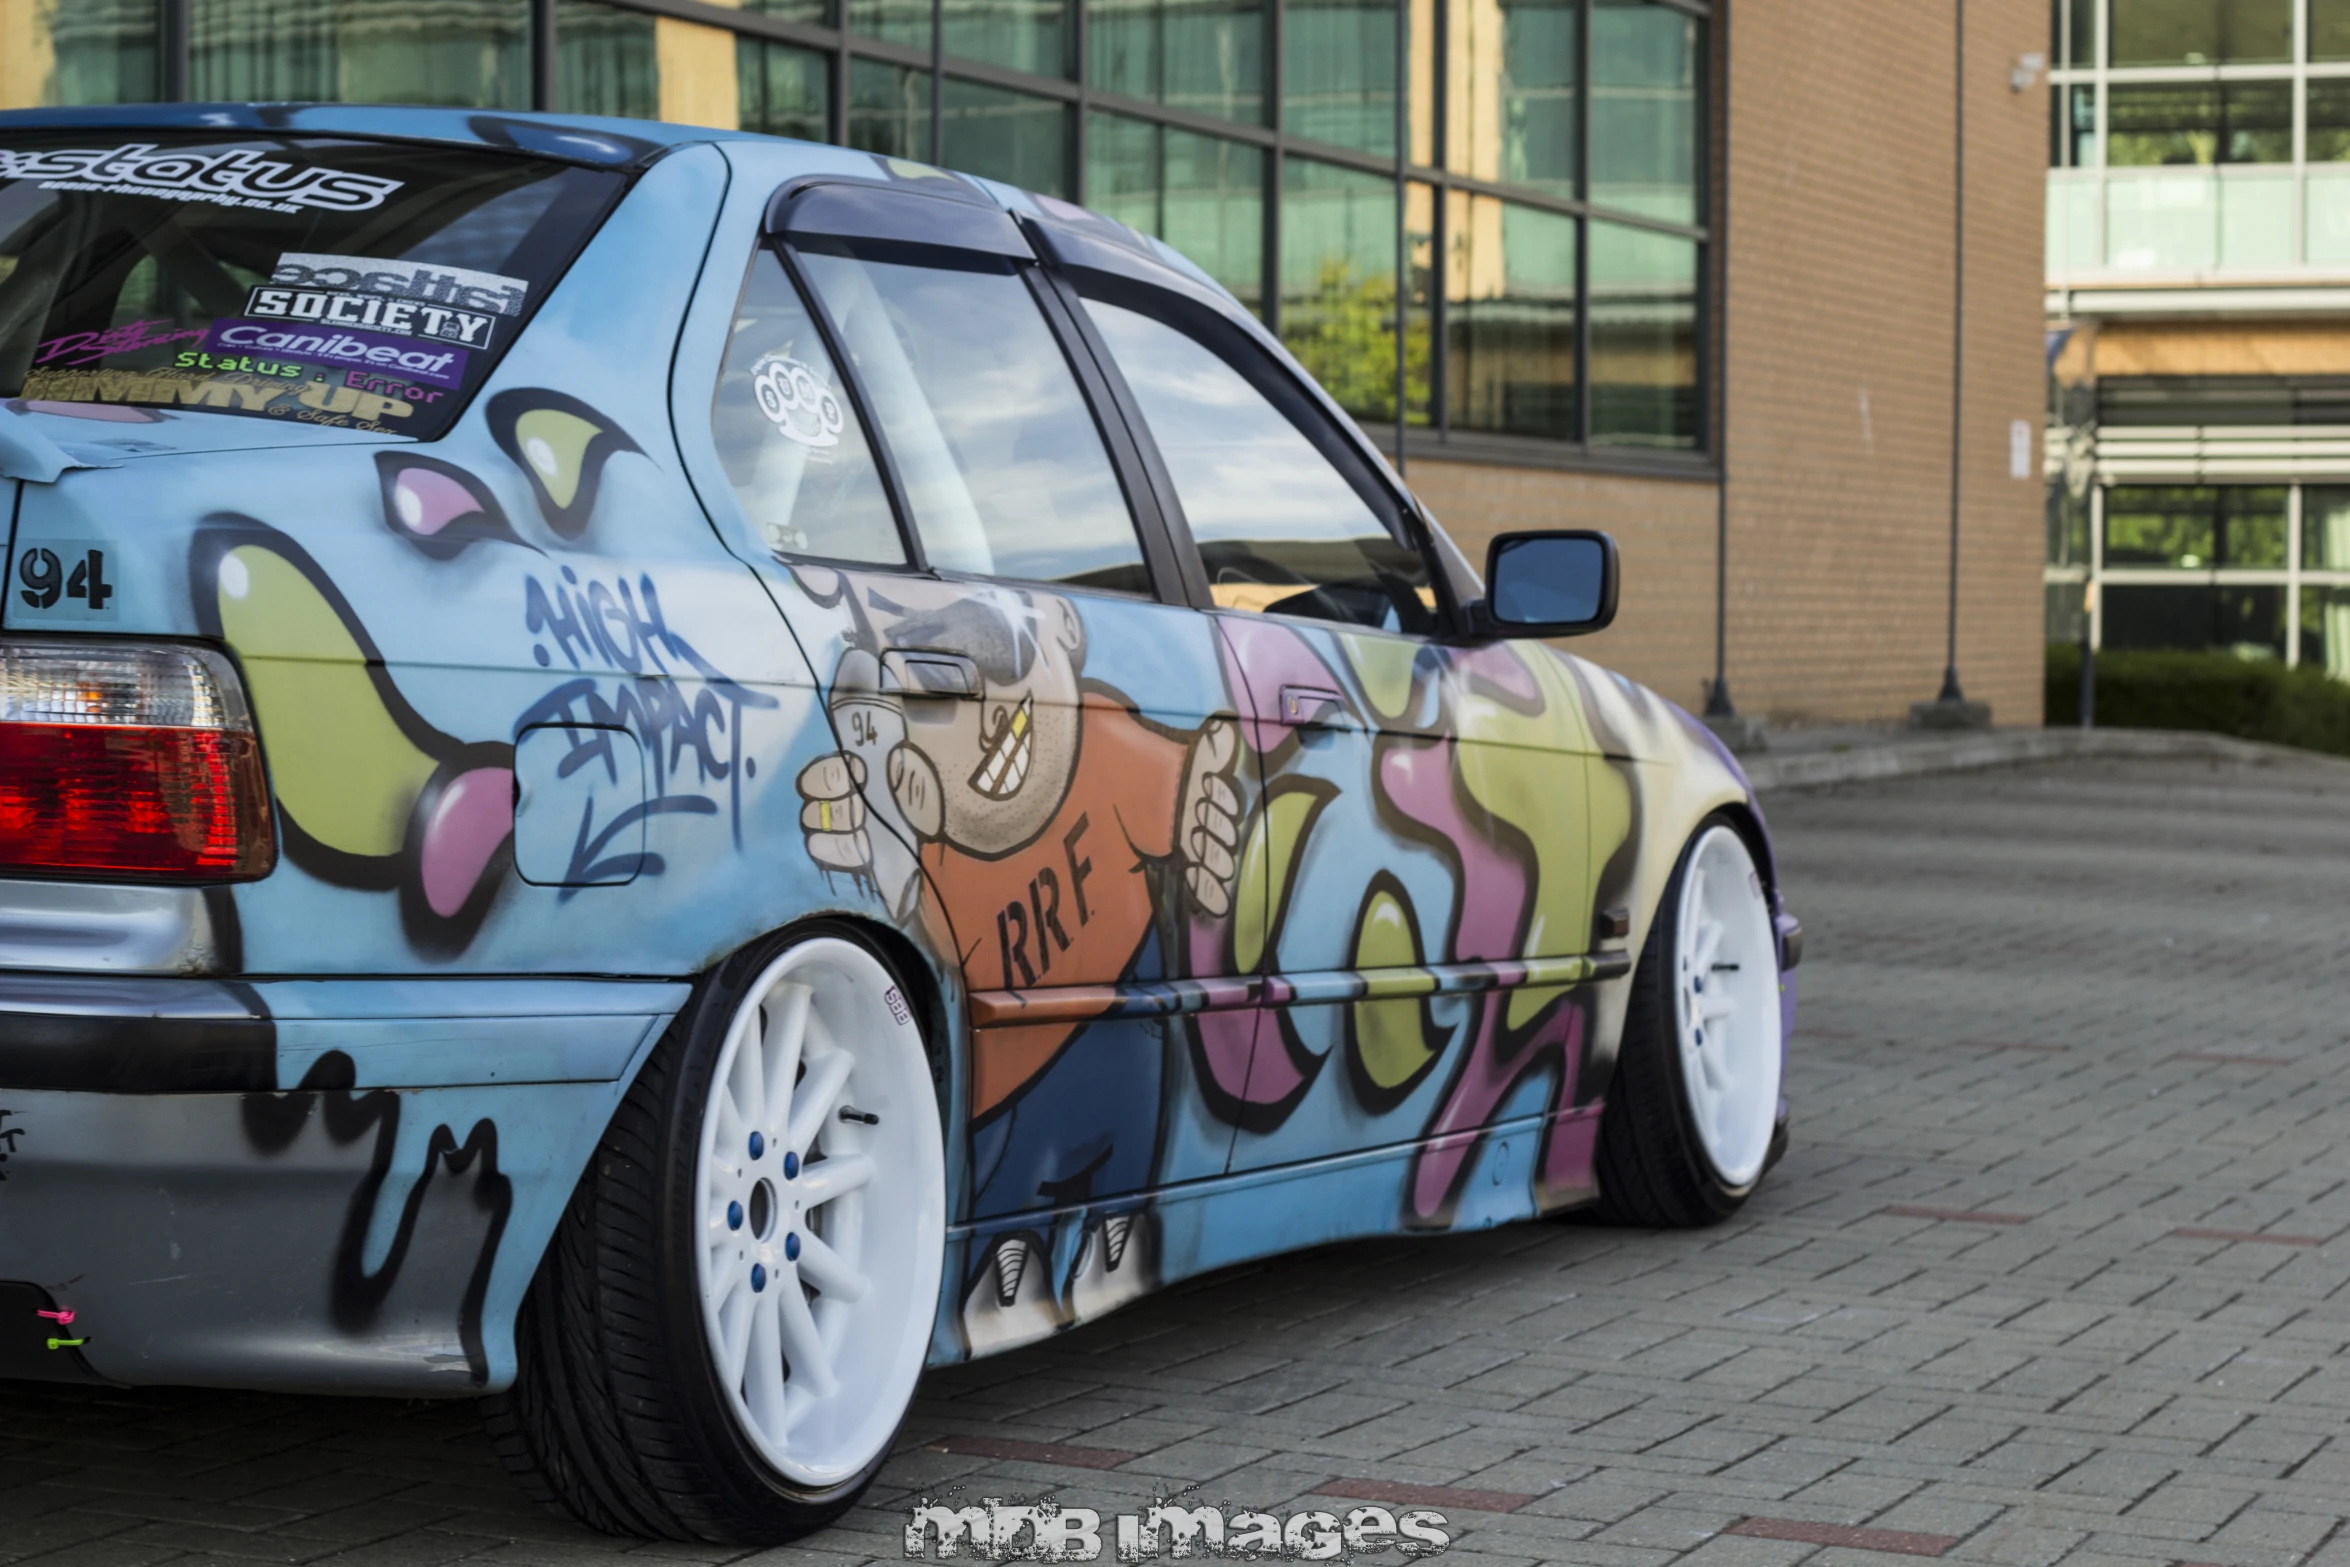 a bmw car with graffiti painted on the rear